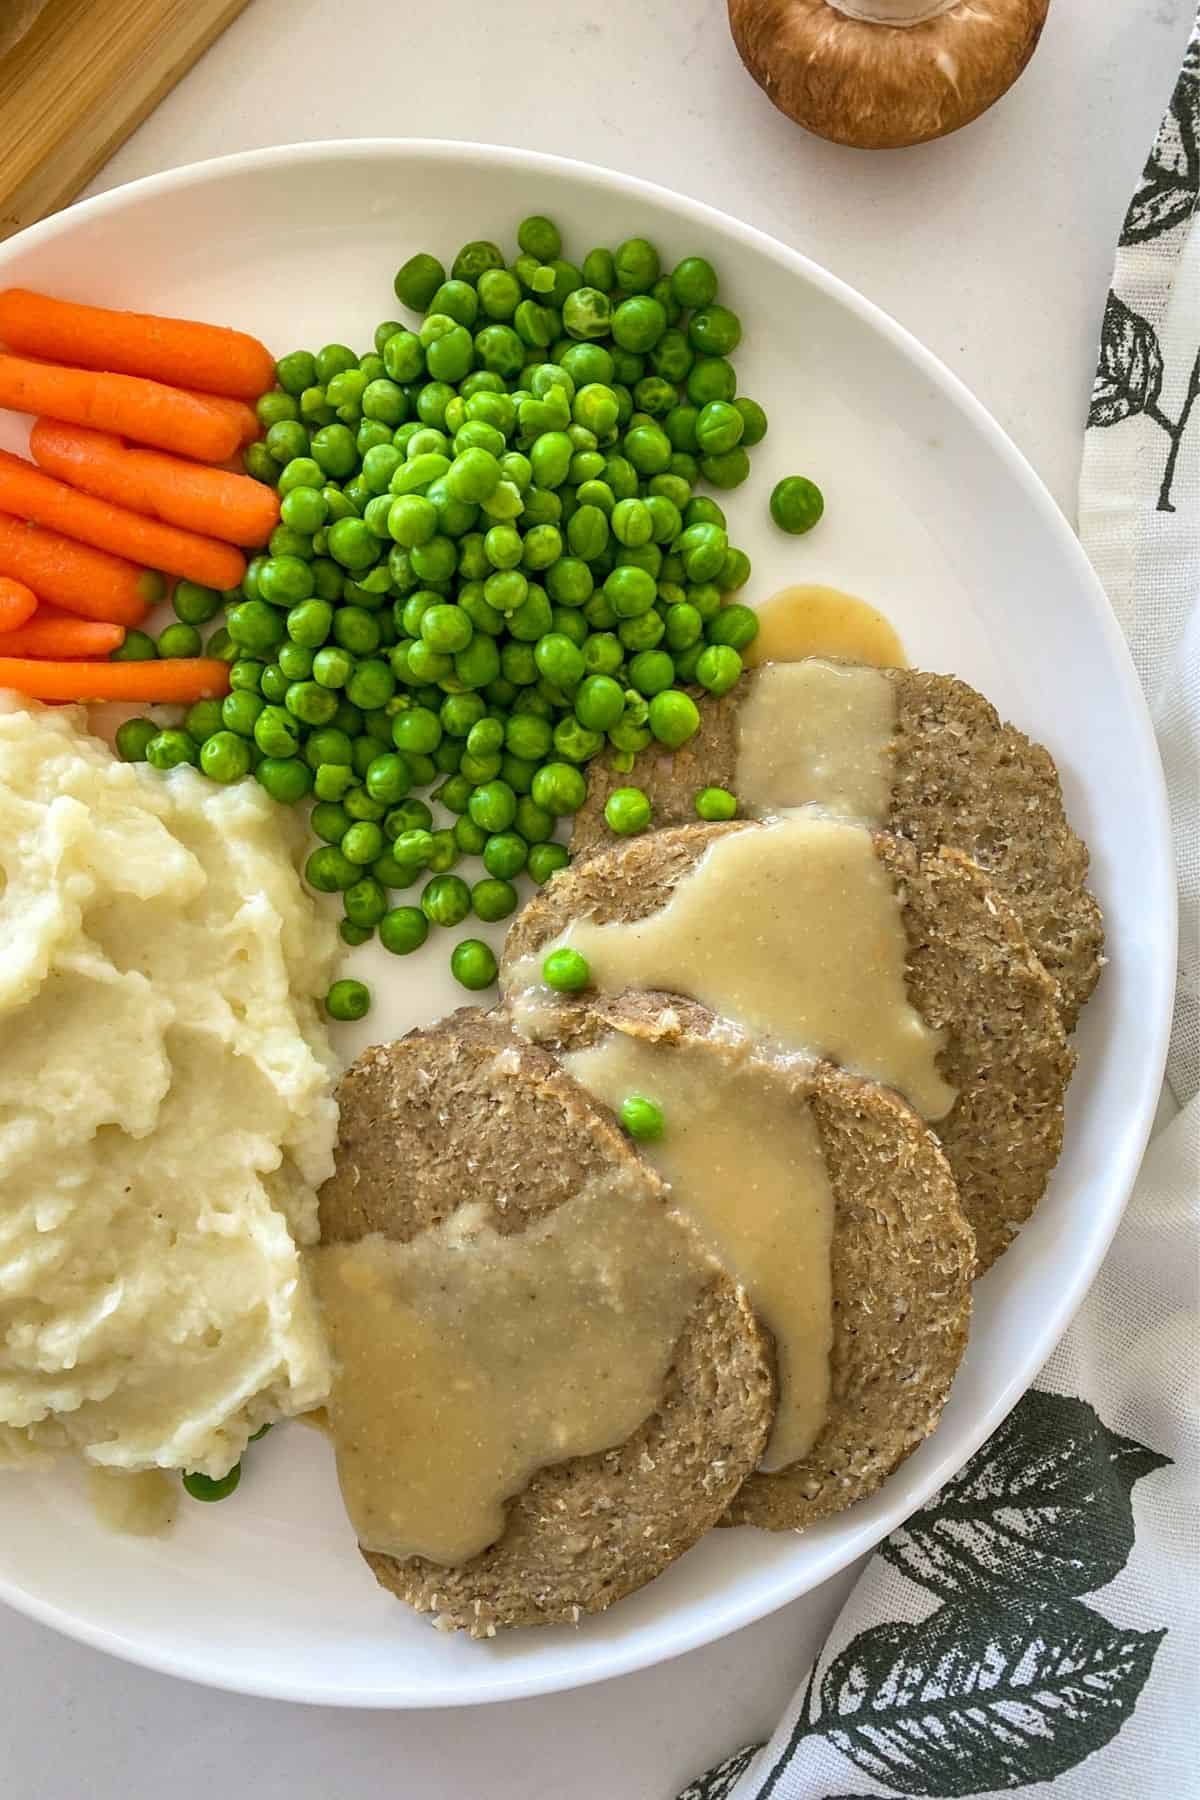 White plate with slices of meat, peas, carrots and mashed potaoes.